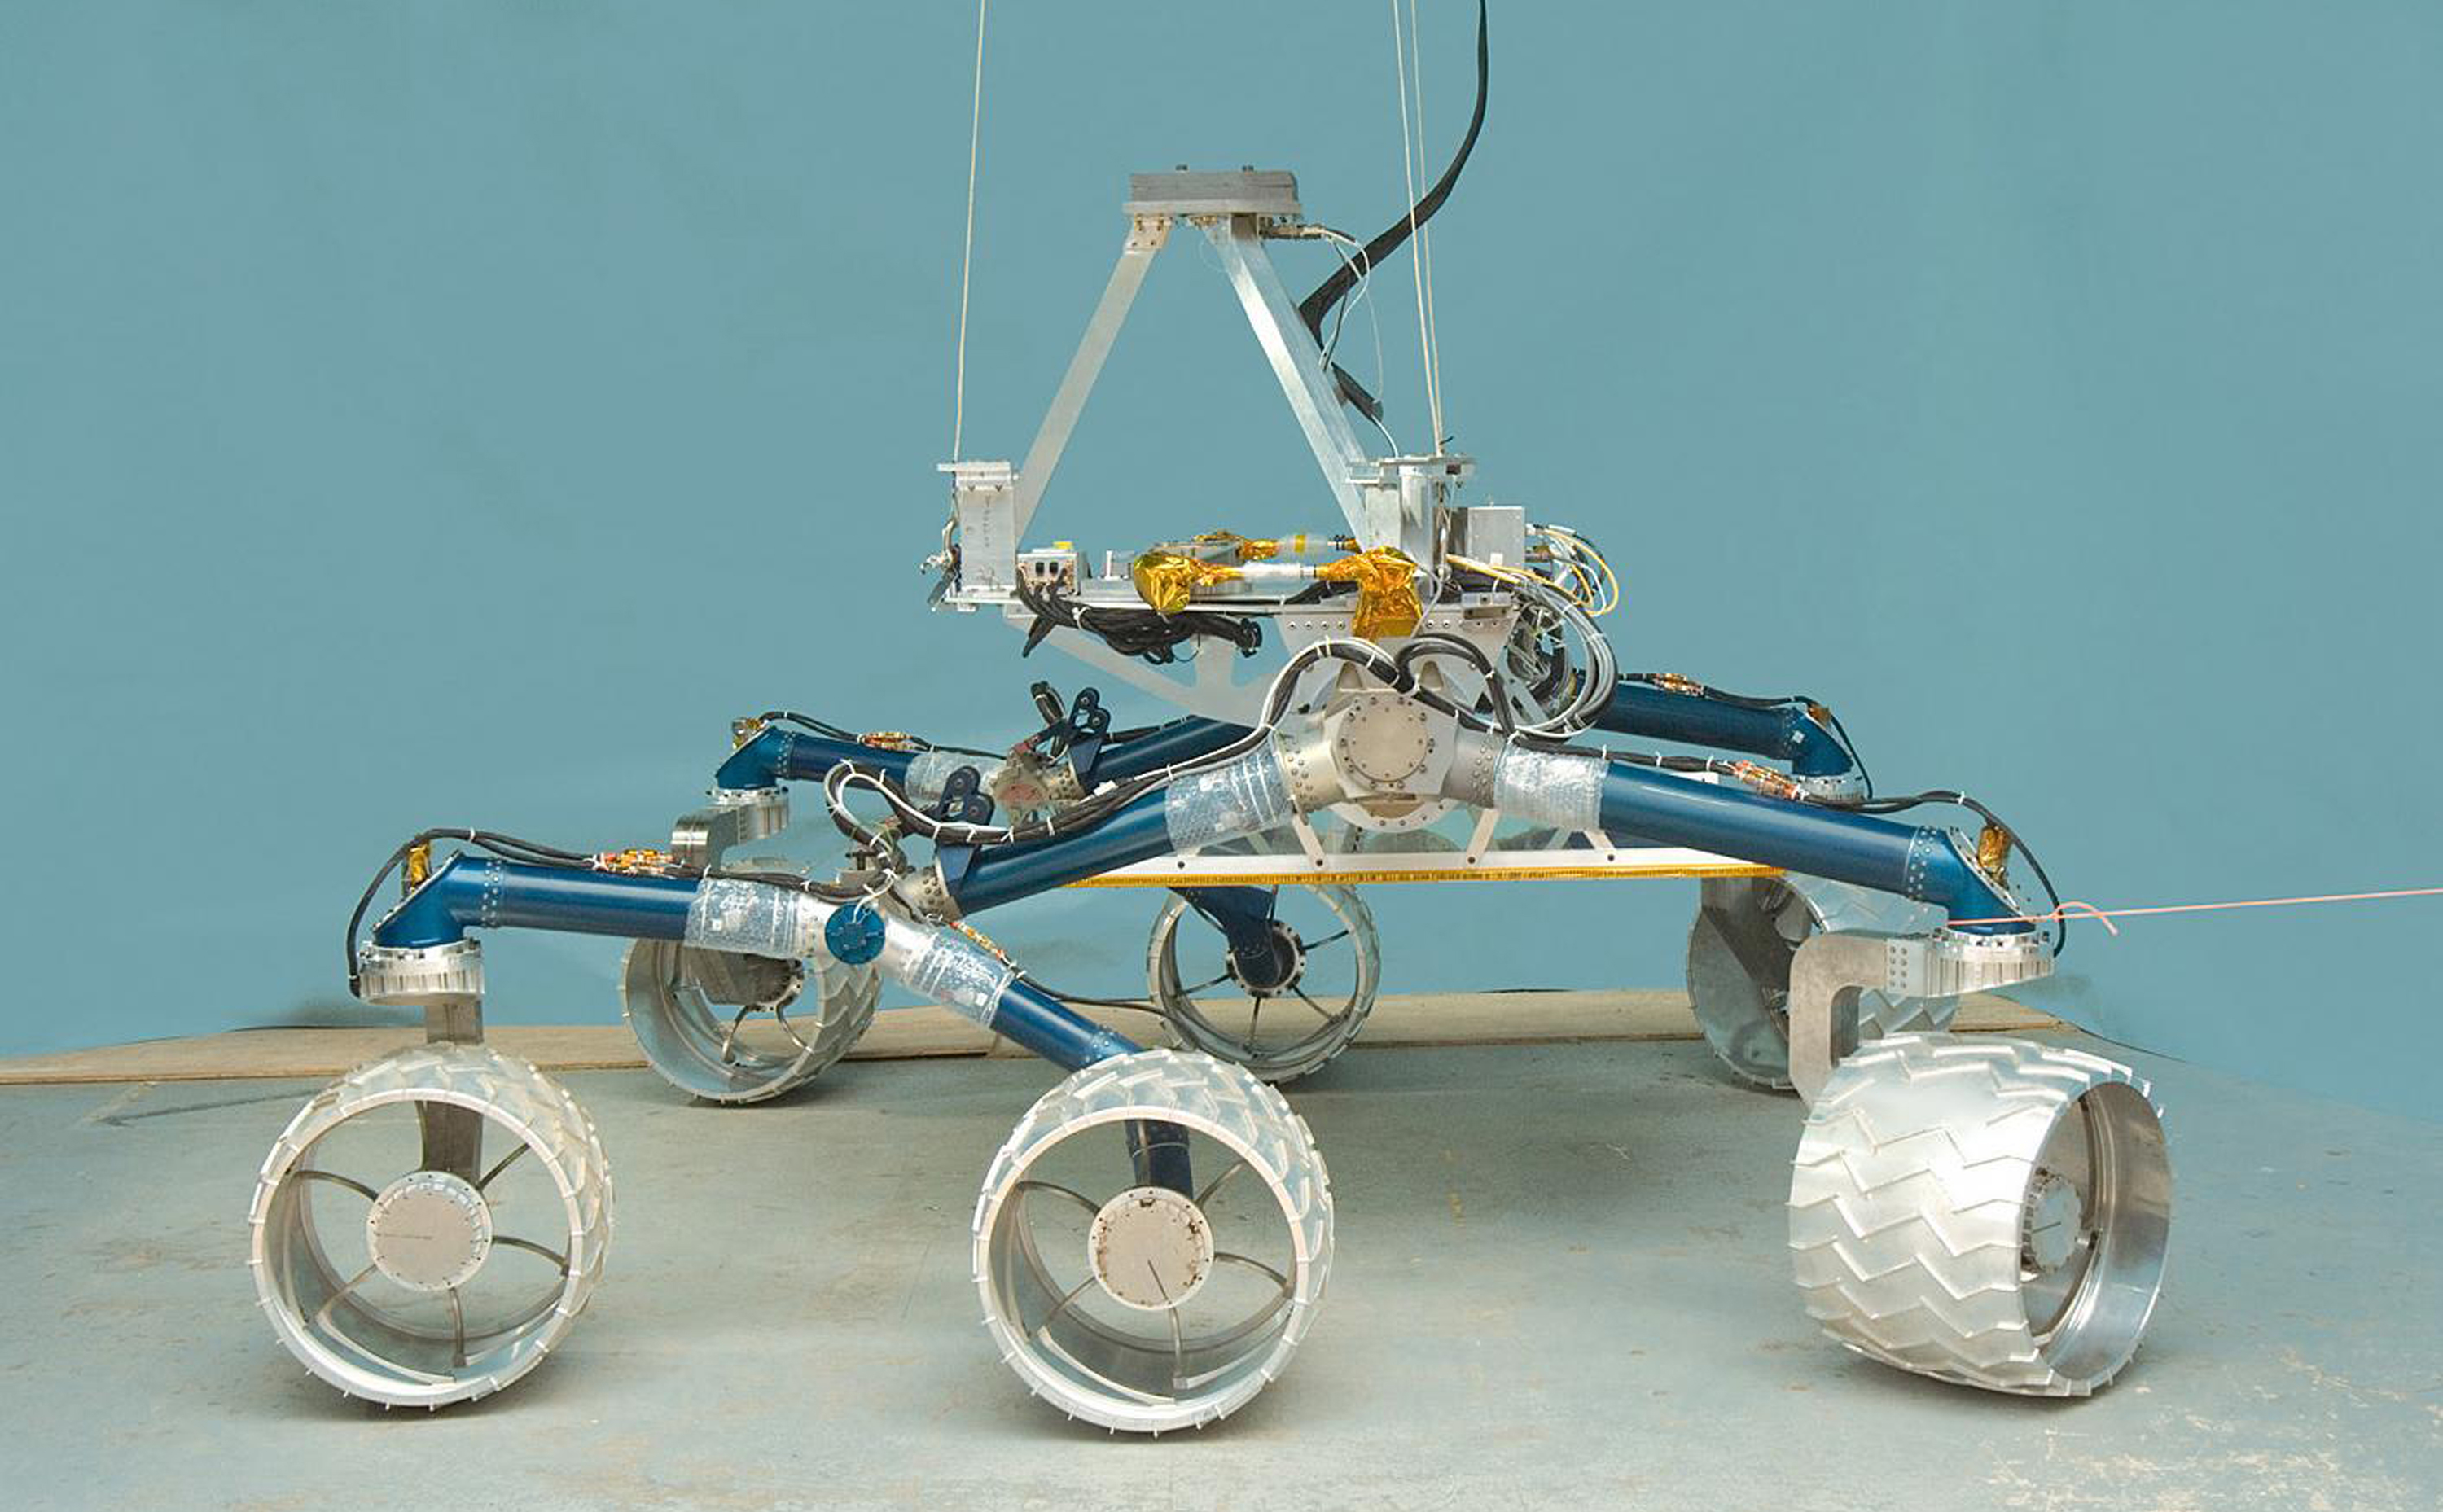 The team developing NASA's Mars Science Laboratory calls this test rover "Scarecrow" because the vehicle does not include a computer brain. Mobility engineers use this test rover to evaluate mobility and suspension performance.